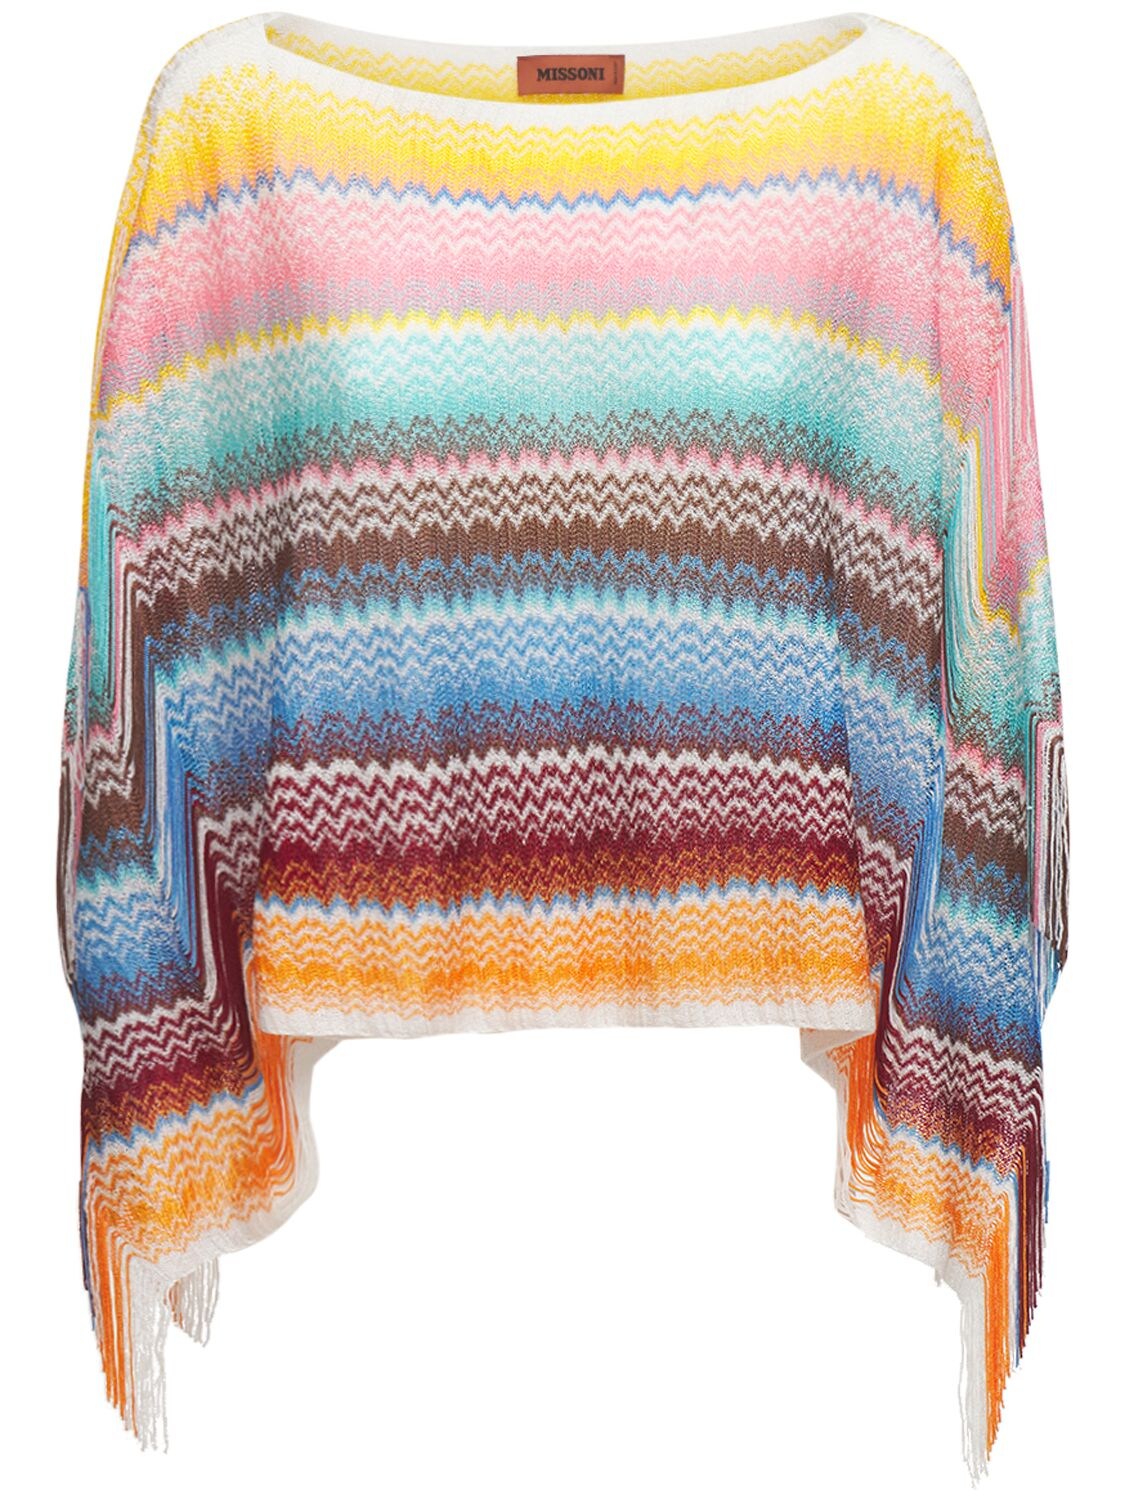 Missoni Striped Knit Fringed Poncho In Multicolor Soft